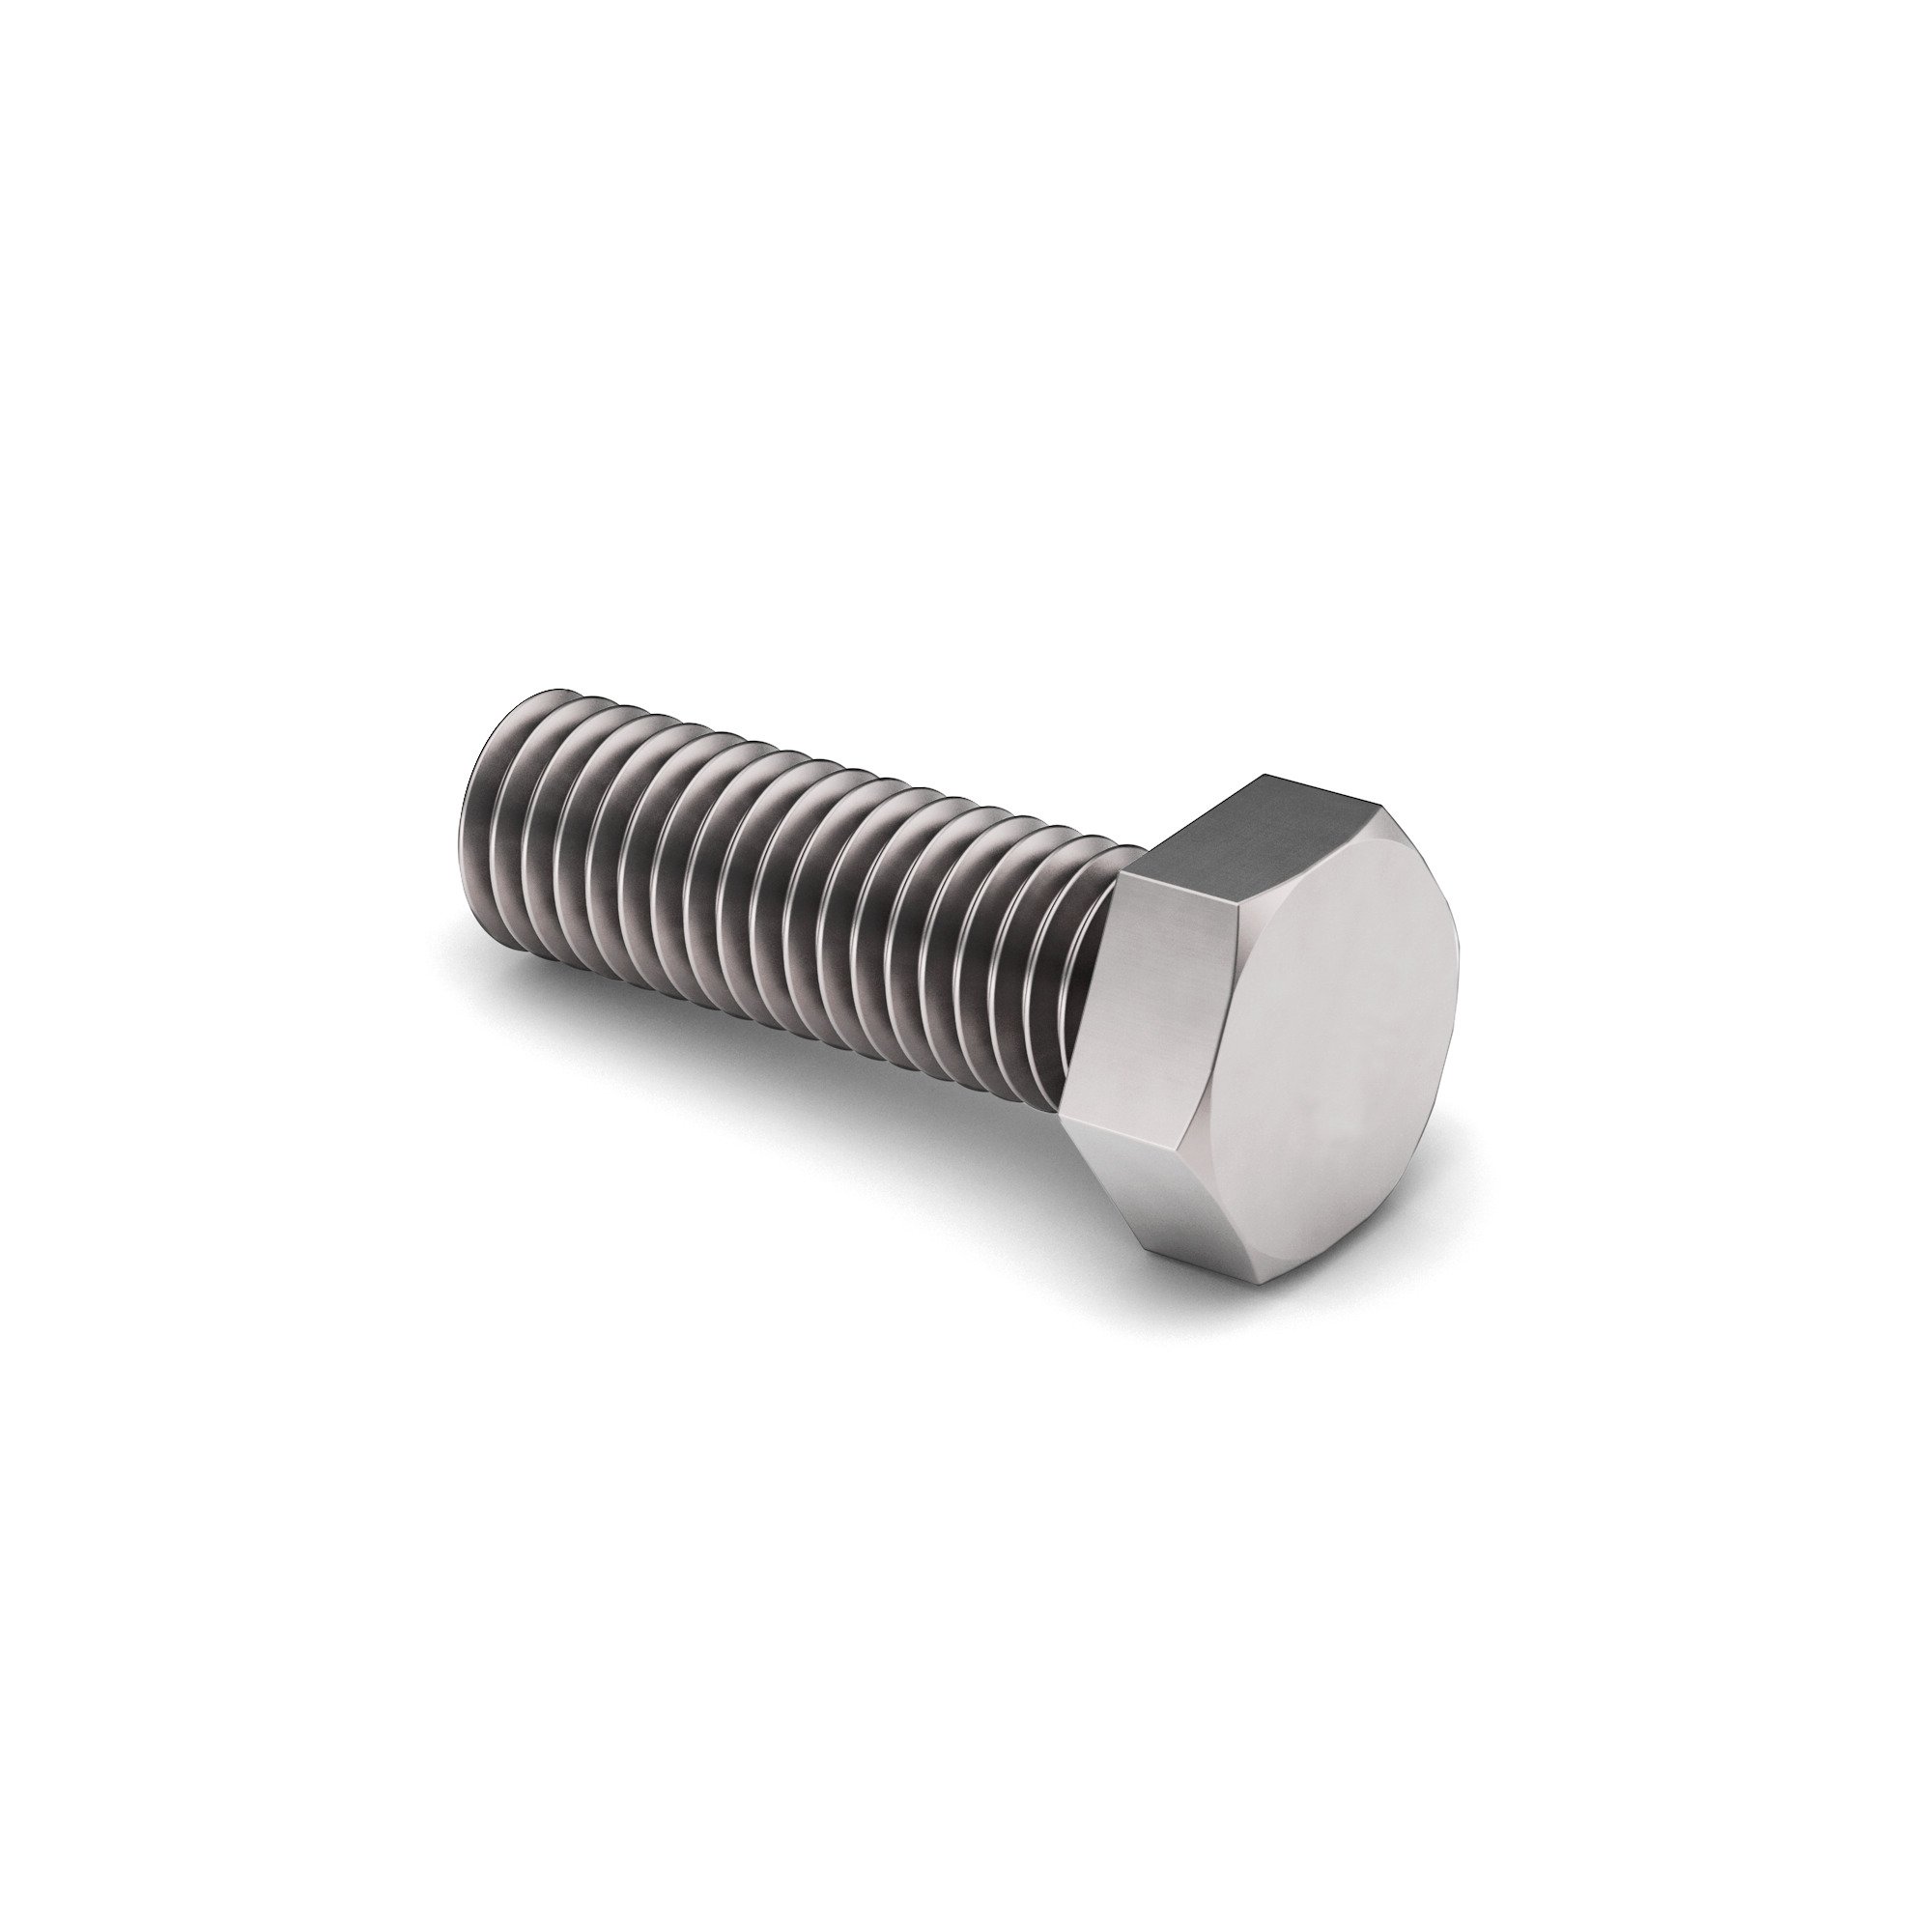 5/8-18x2 J429 GR 5 Hex Hd Cap Screw W/One 3/32 Hole A/F Zinc Clear Trivalent Made in USA